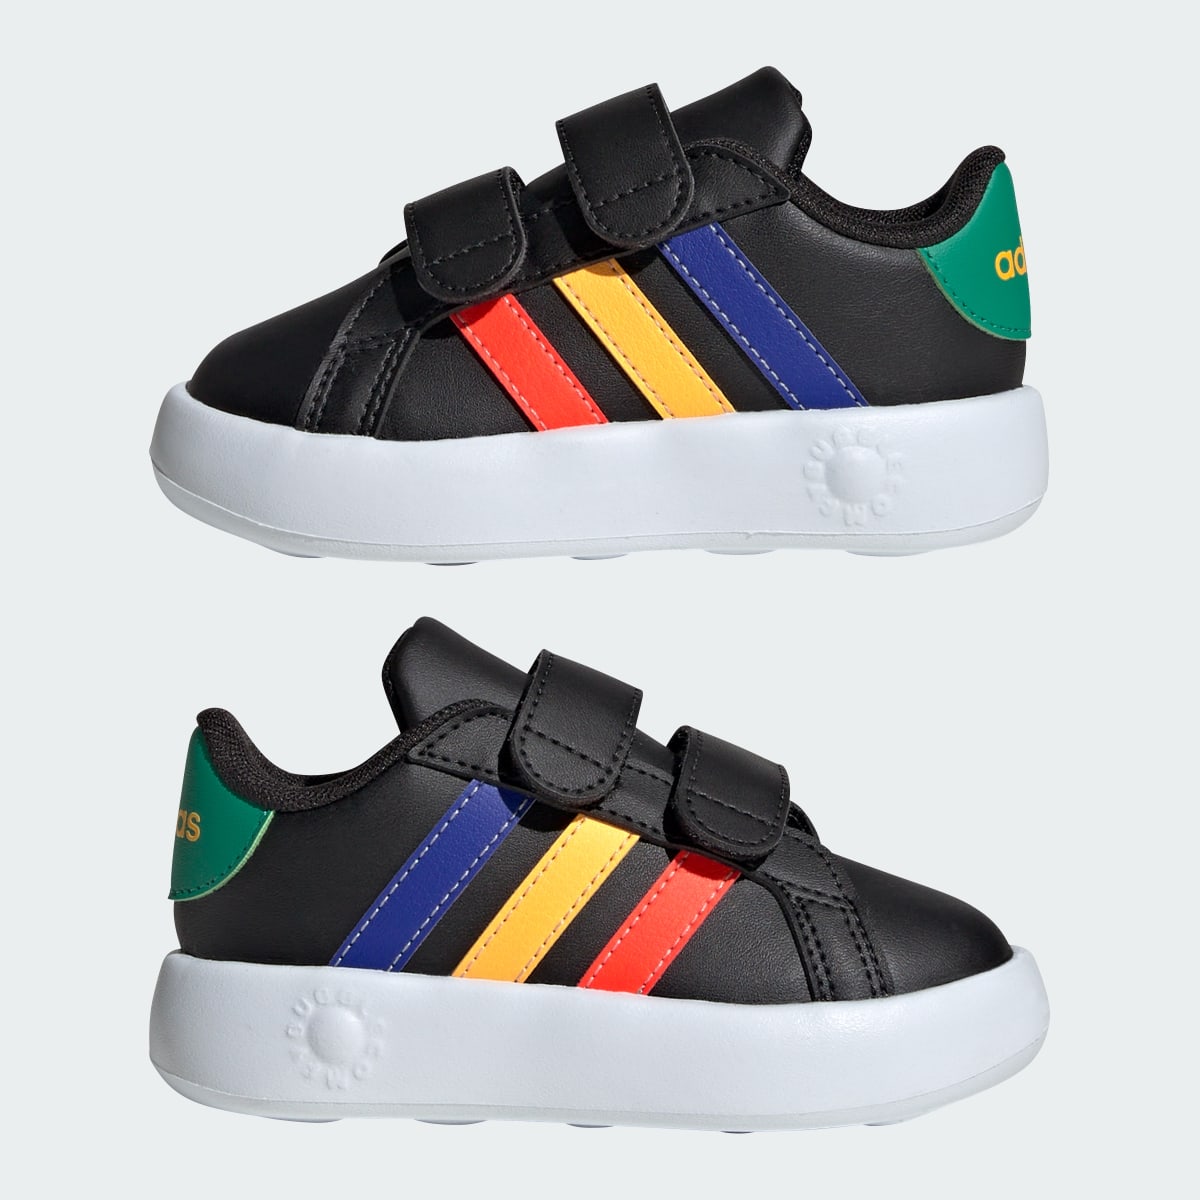 Adidas Grand Court 2.0 Shoes Kids. 8